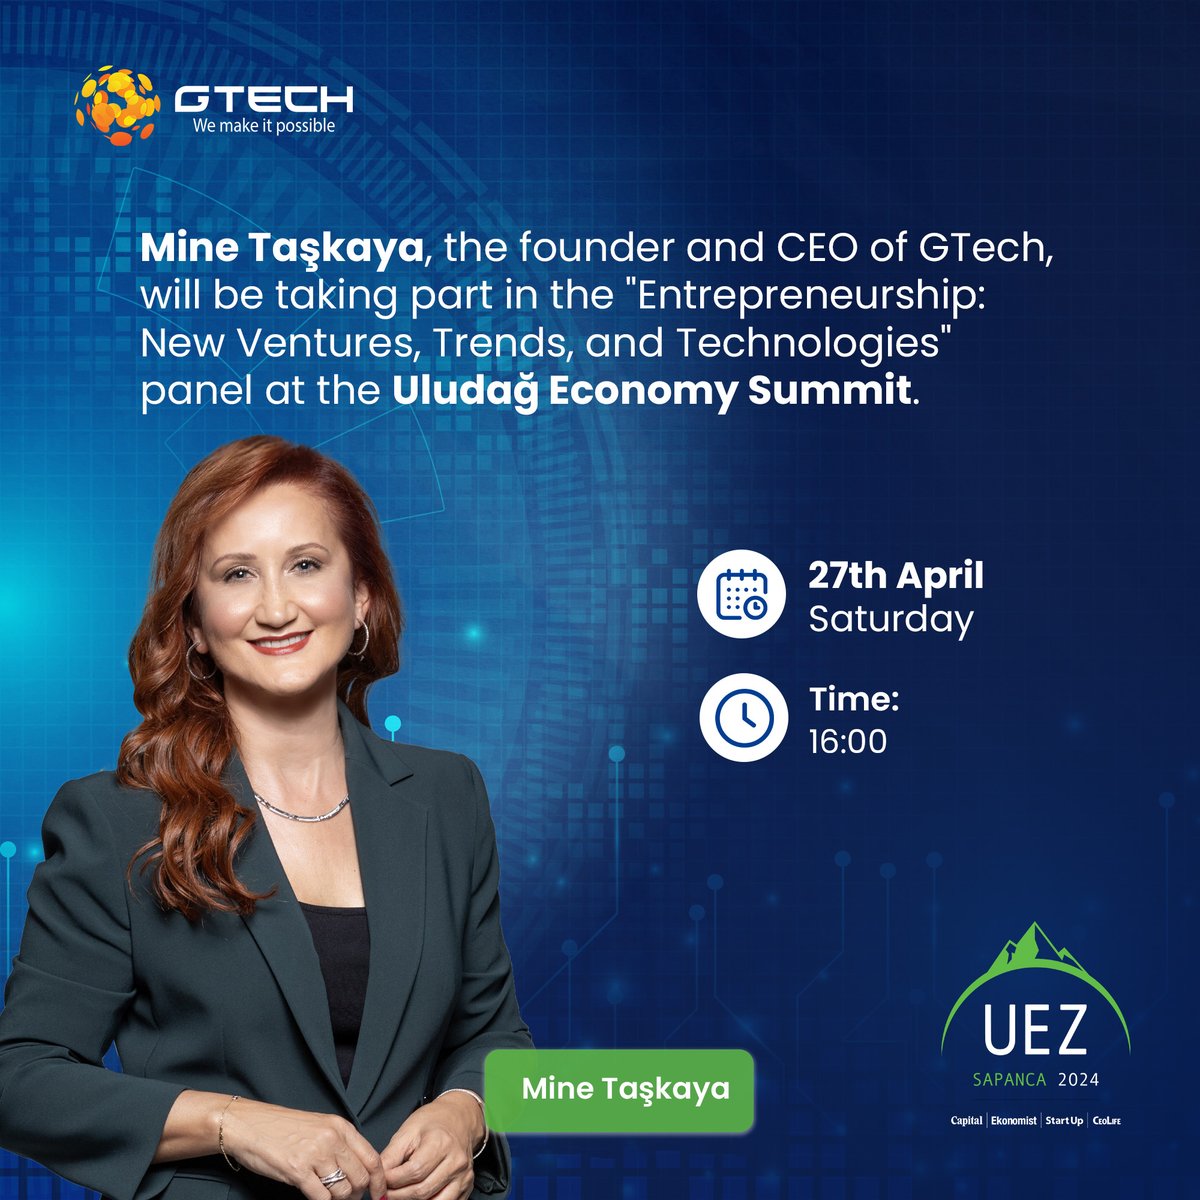 The most influential business and economy summit of the region is about to begin! 

Join us at this significant event! #UEZ2024 #Entrepreneurship #GTech #Technology #Innovation